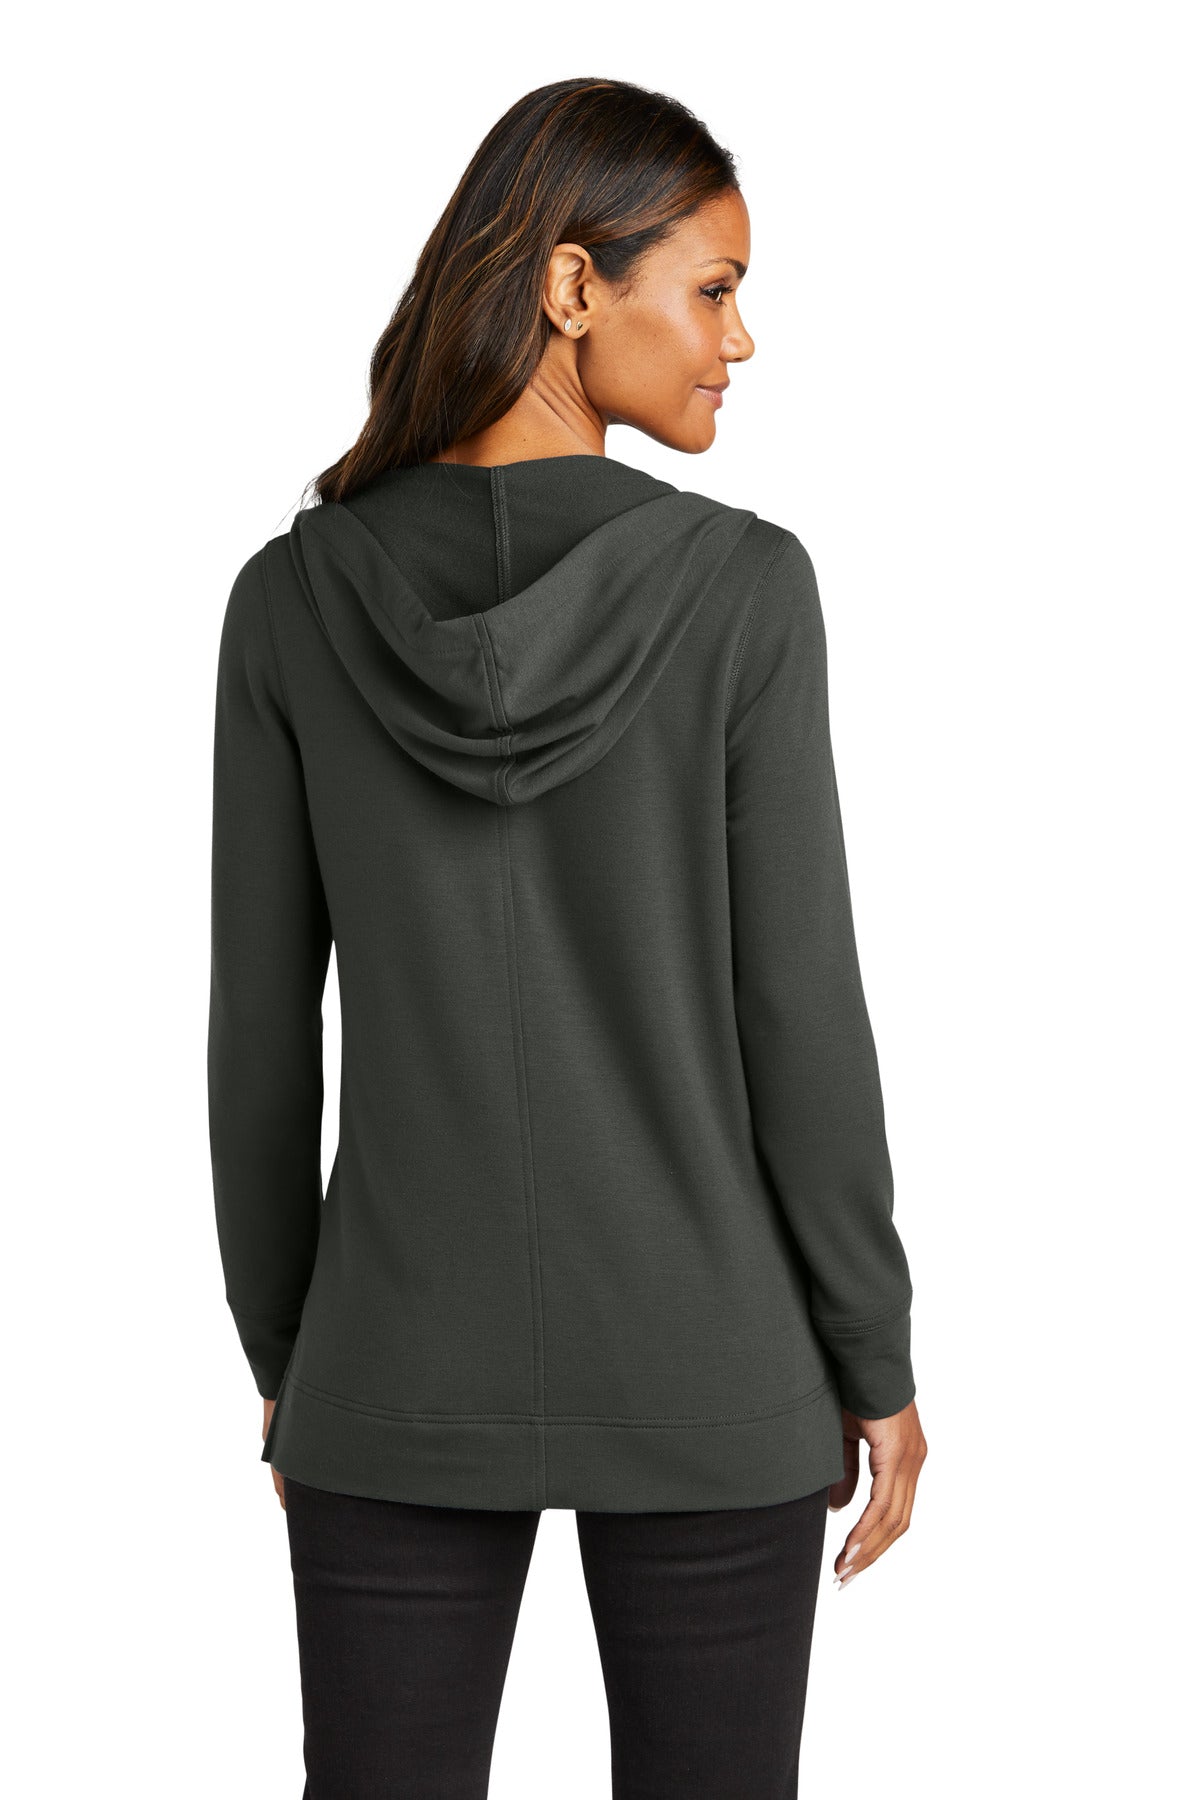 Port Authority® Ladies Microterry Pullover Hoodie LK826 - DFW Impression